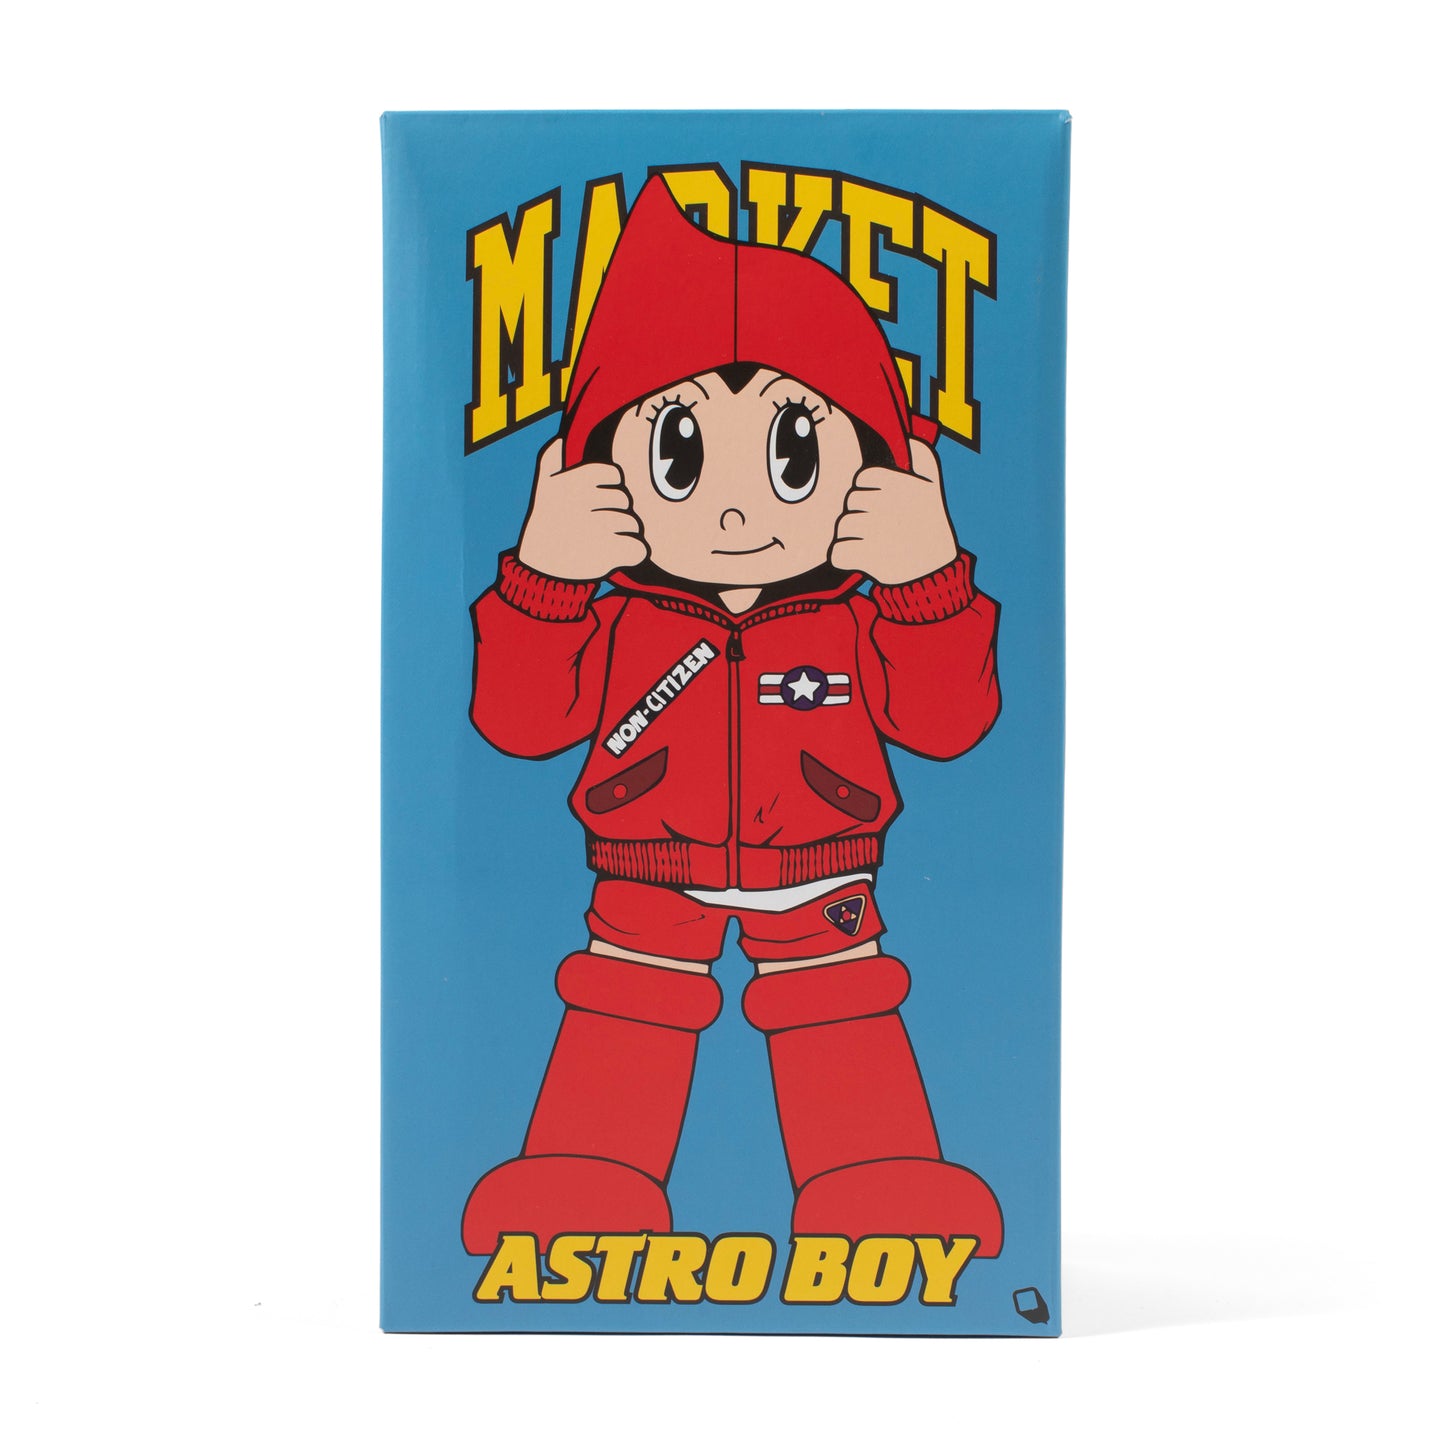 MARKET clothing brand SMILEY TOYQUBE ASTRO BOY HOODIE FIGURE. Find more homegoods and graphic tees at MarketStudios.com. Formally Chinatown Market. 